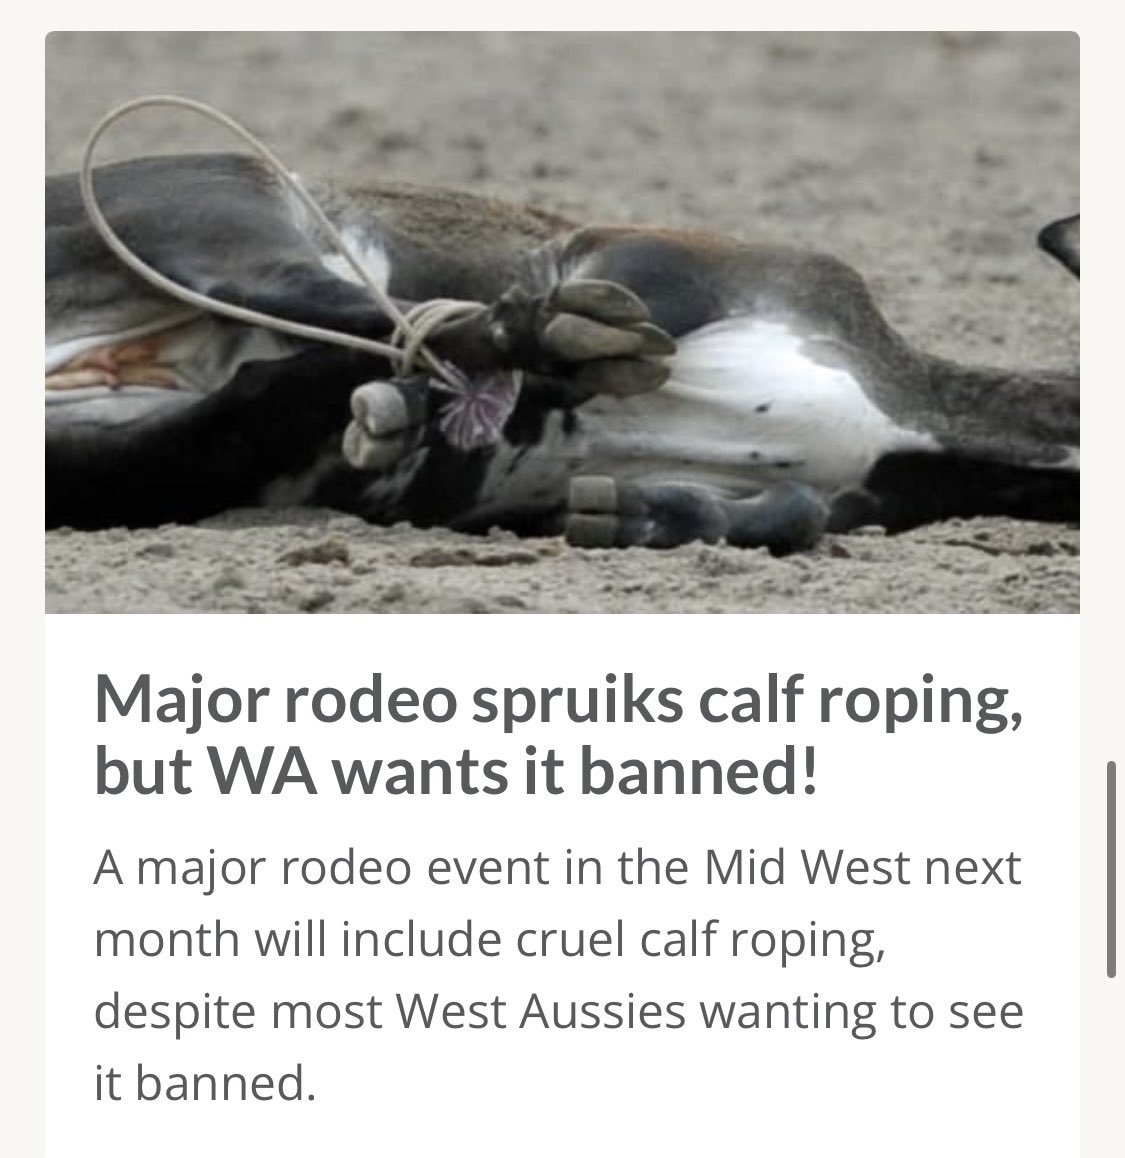 ANIMAL ABUSE FOR ENTERTAINMENT 🤬💔 #WesternAustralia APPALLING #Rodeo #MullewaMuster #calfroping COWARDLY BULLIES